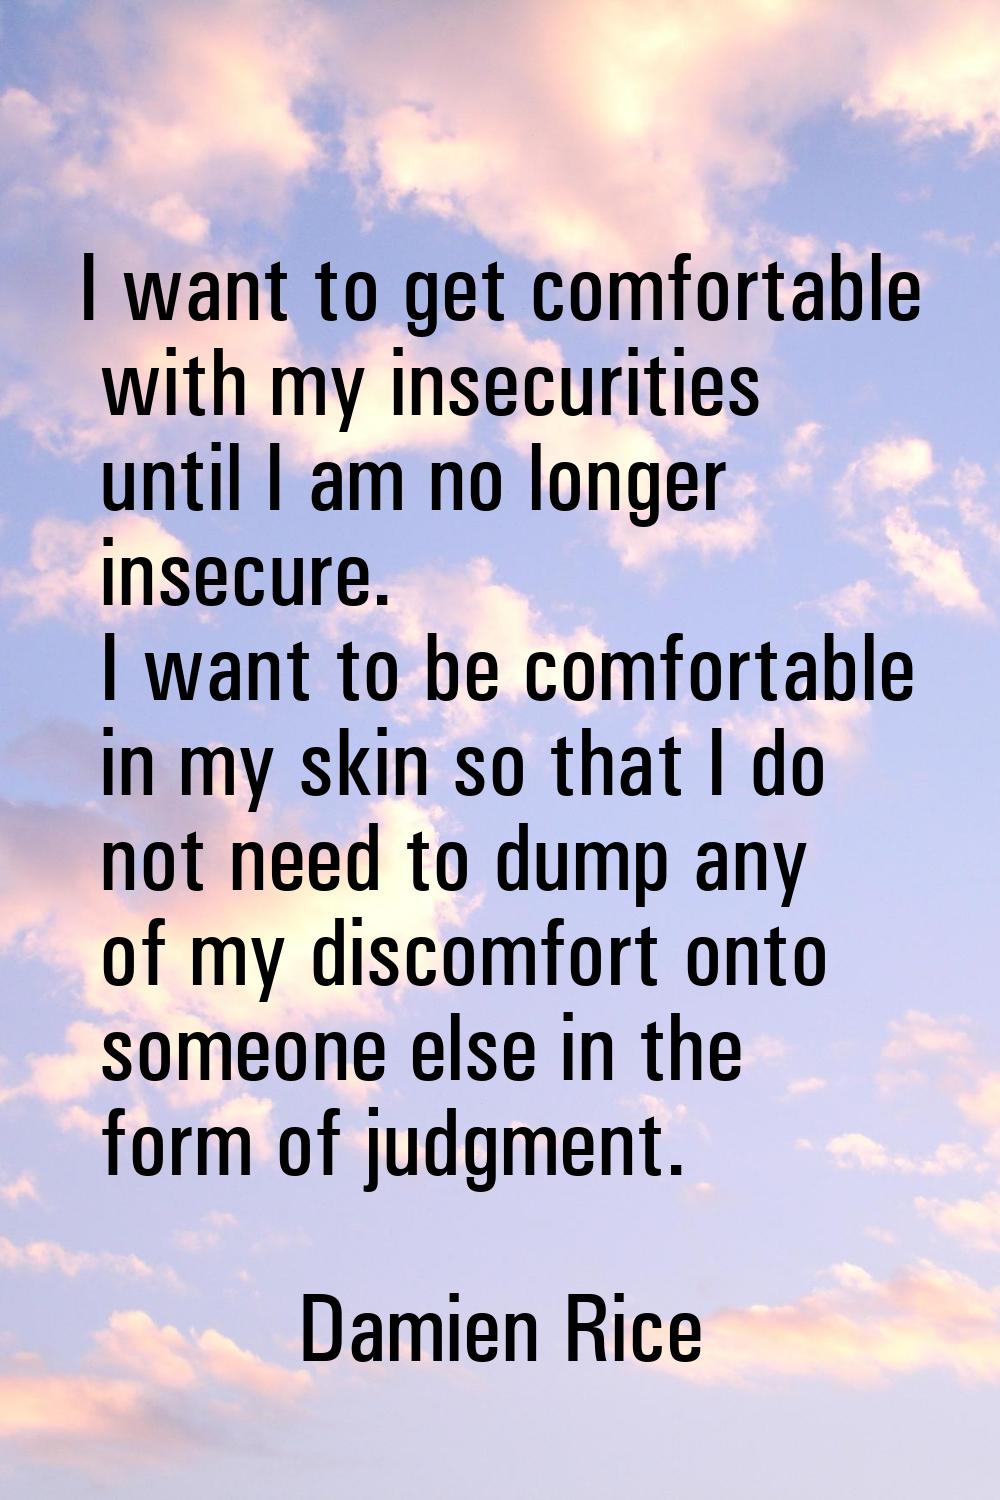 I want to get comfortable with my insecurities until I am no longer insecure. I want to be comforta